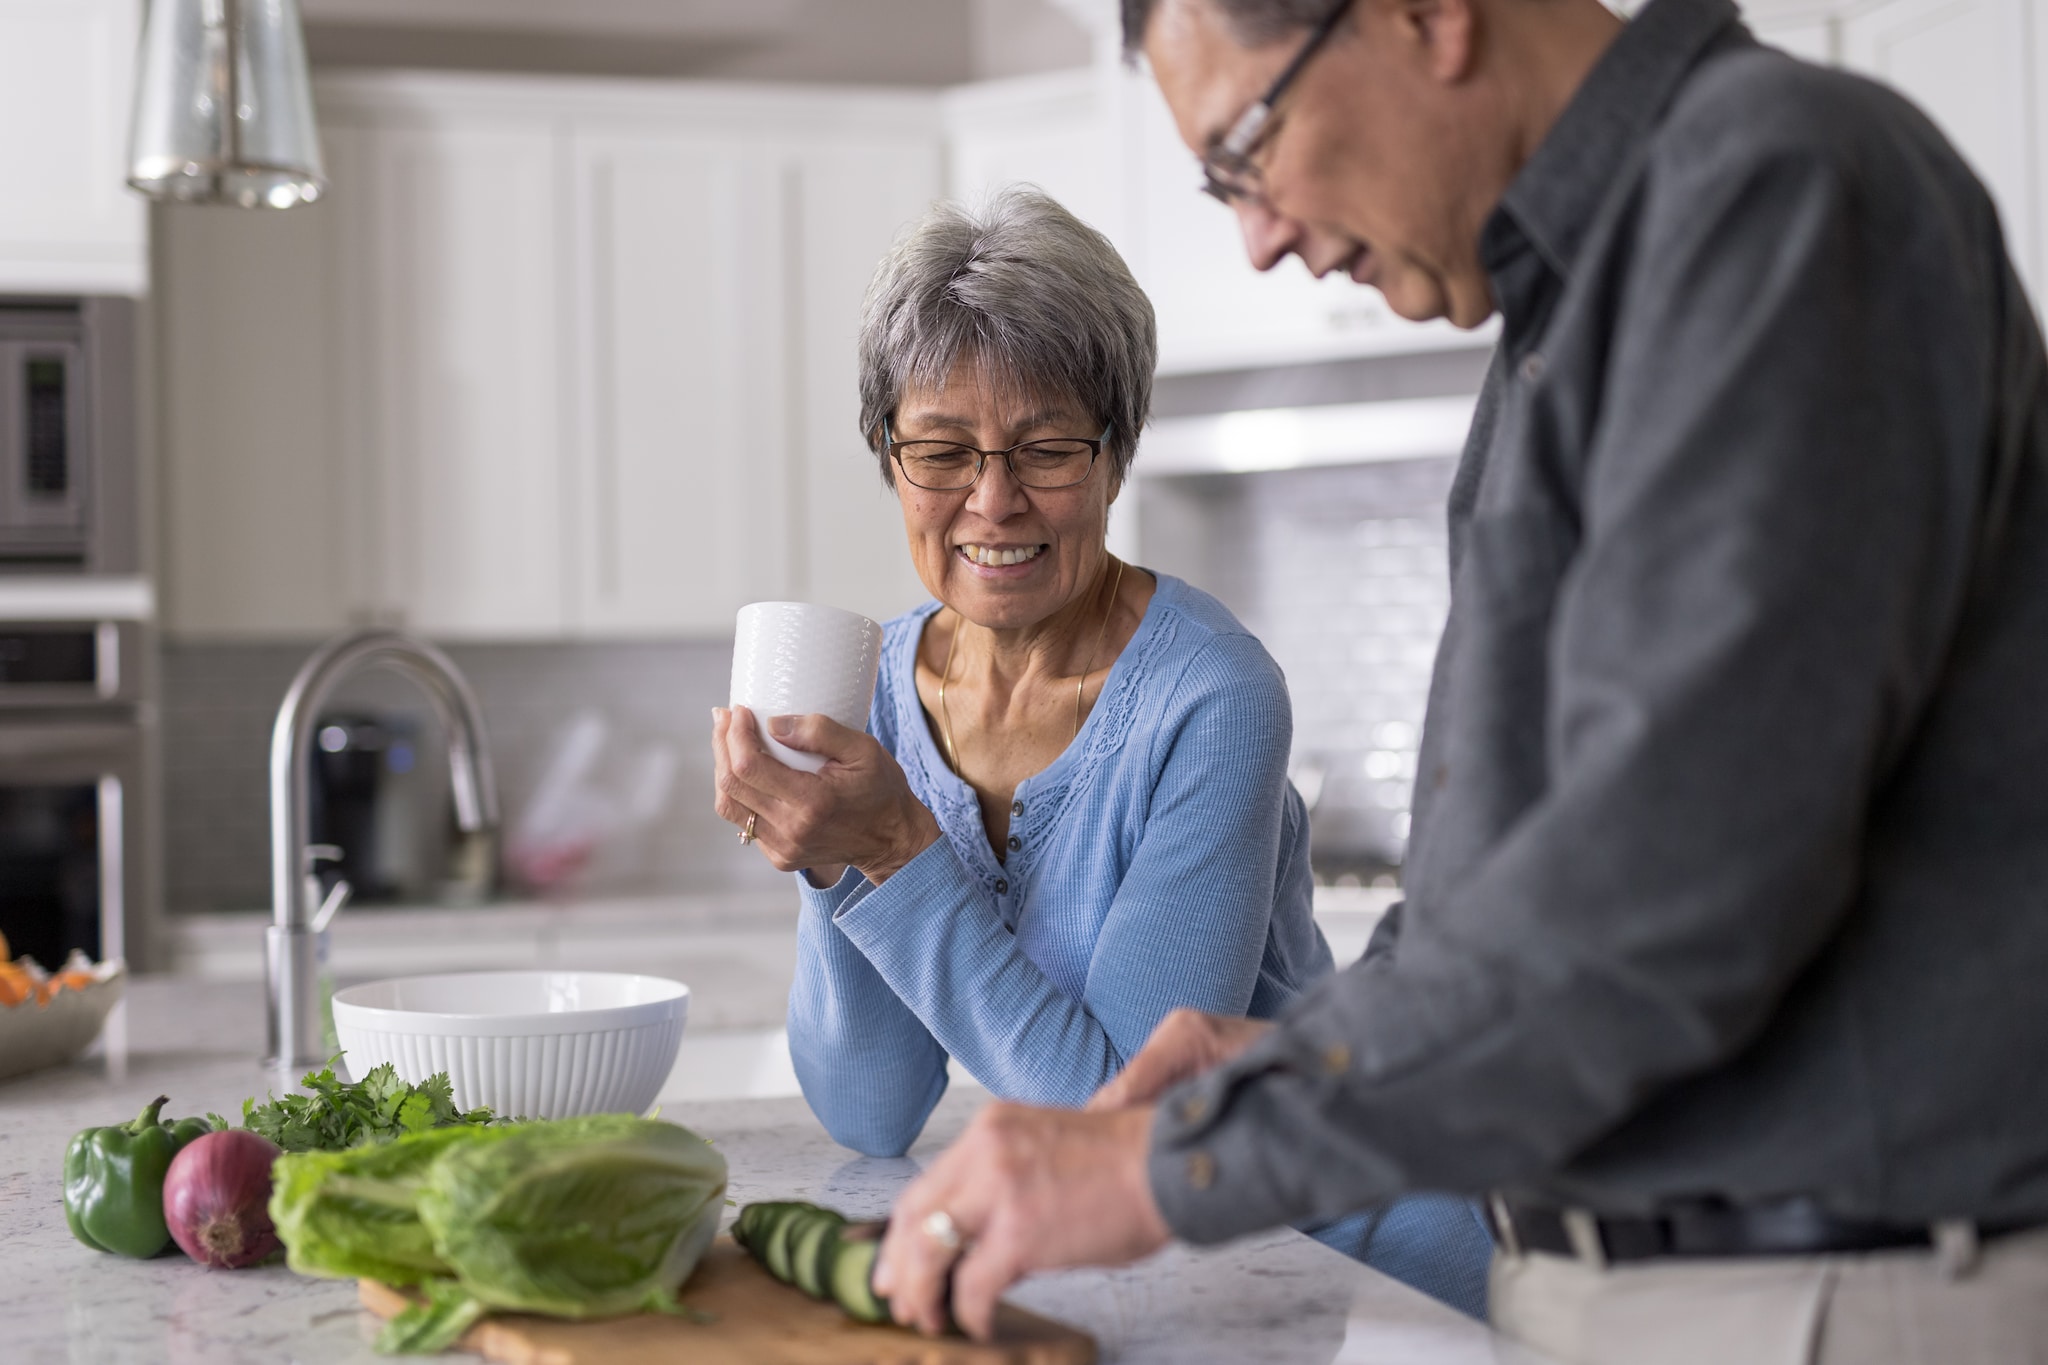 older male preparing a healthy meal for older woman.